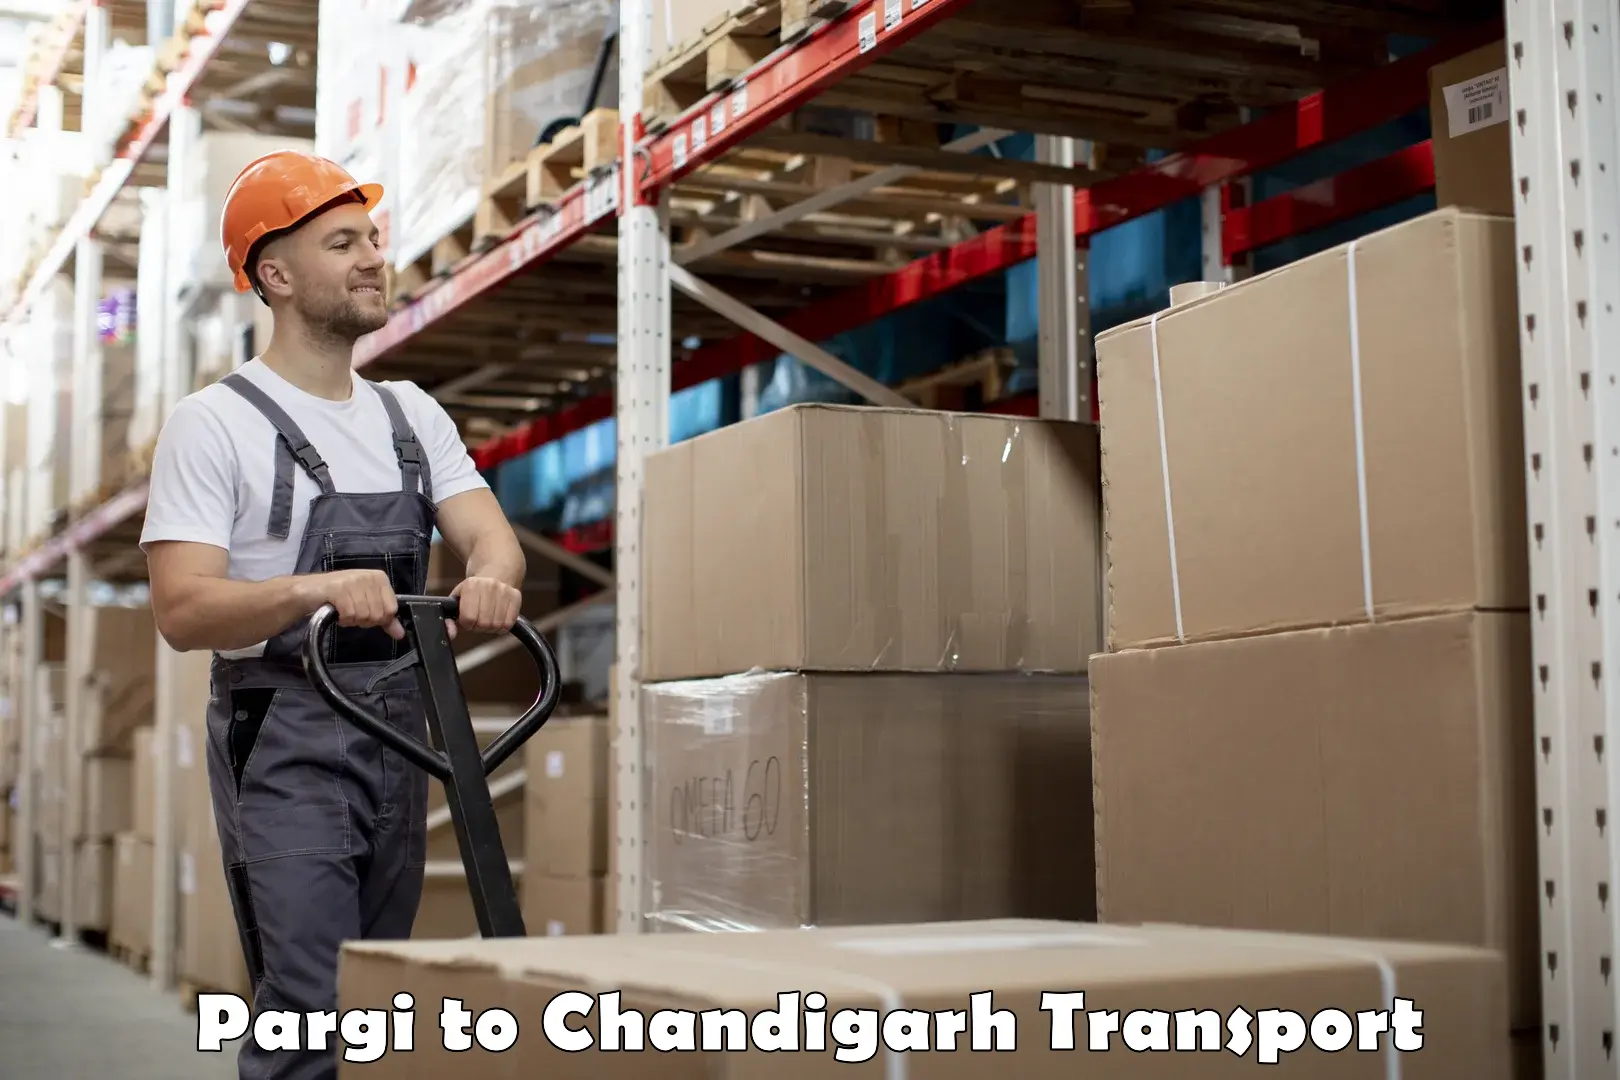 Daily parcel service transport Pargi to Chandigarh